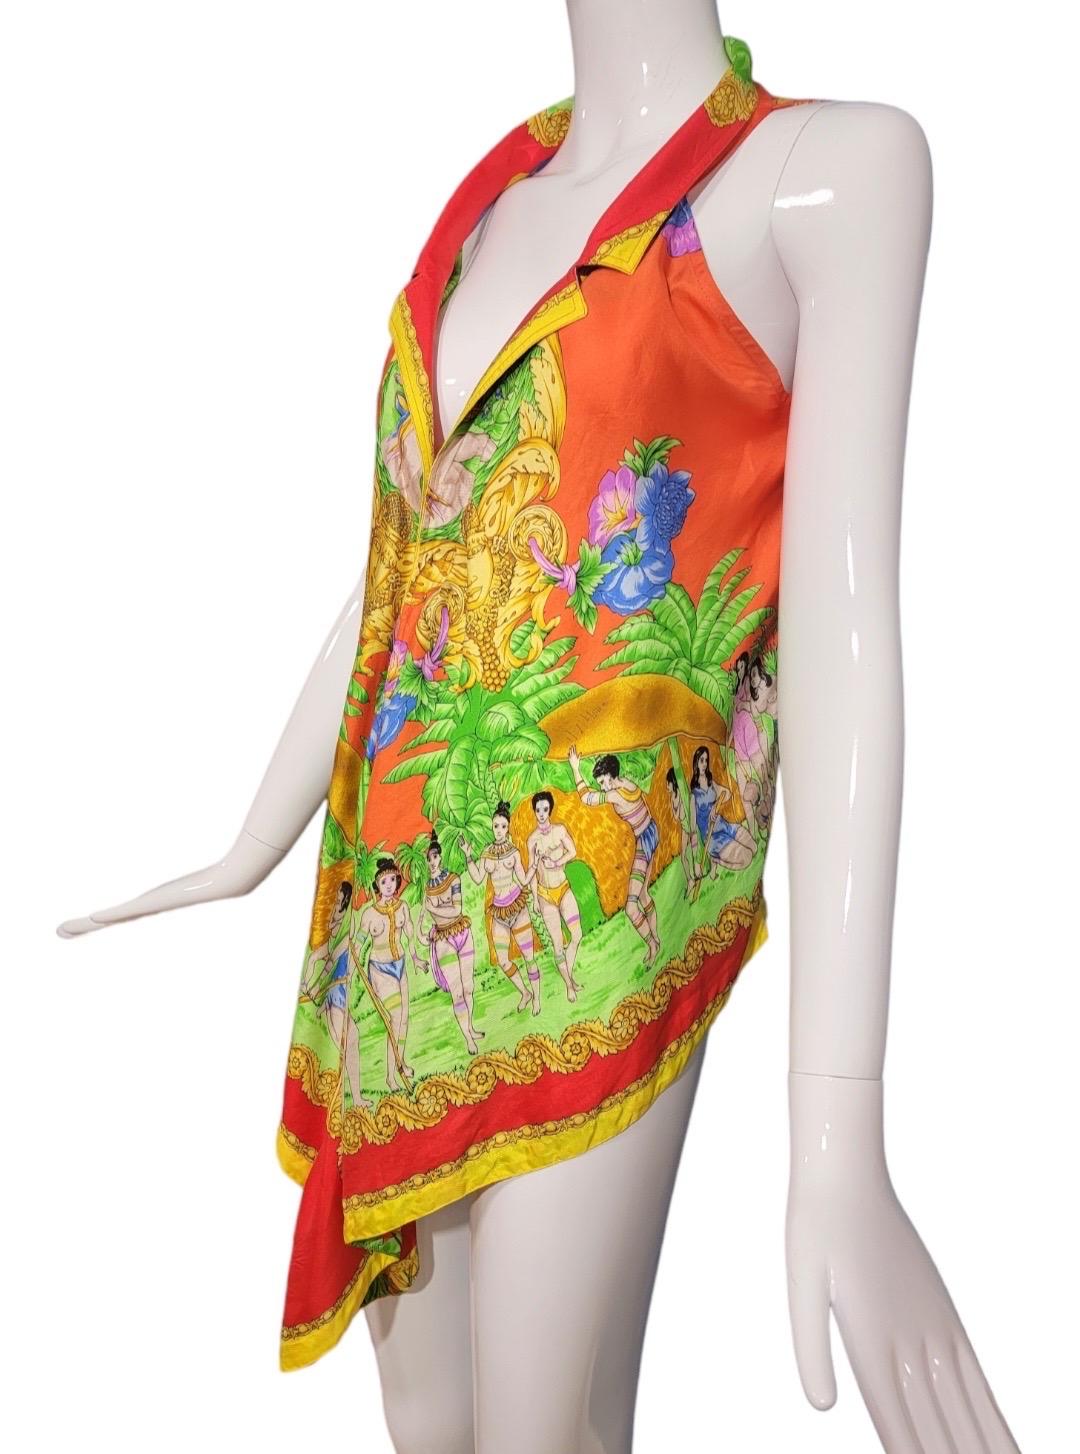 Gianni Versace Paradise Lost print Cropped Top Silk Shirt SS 1993 1